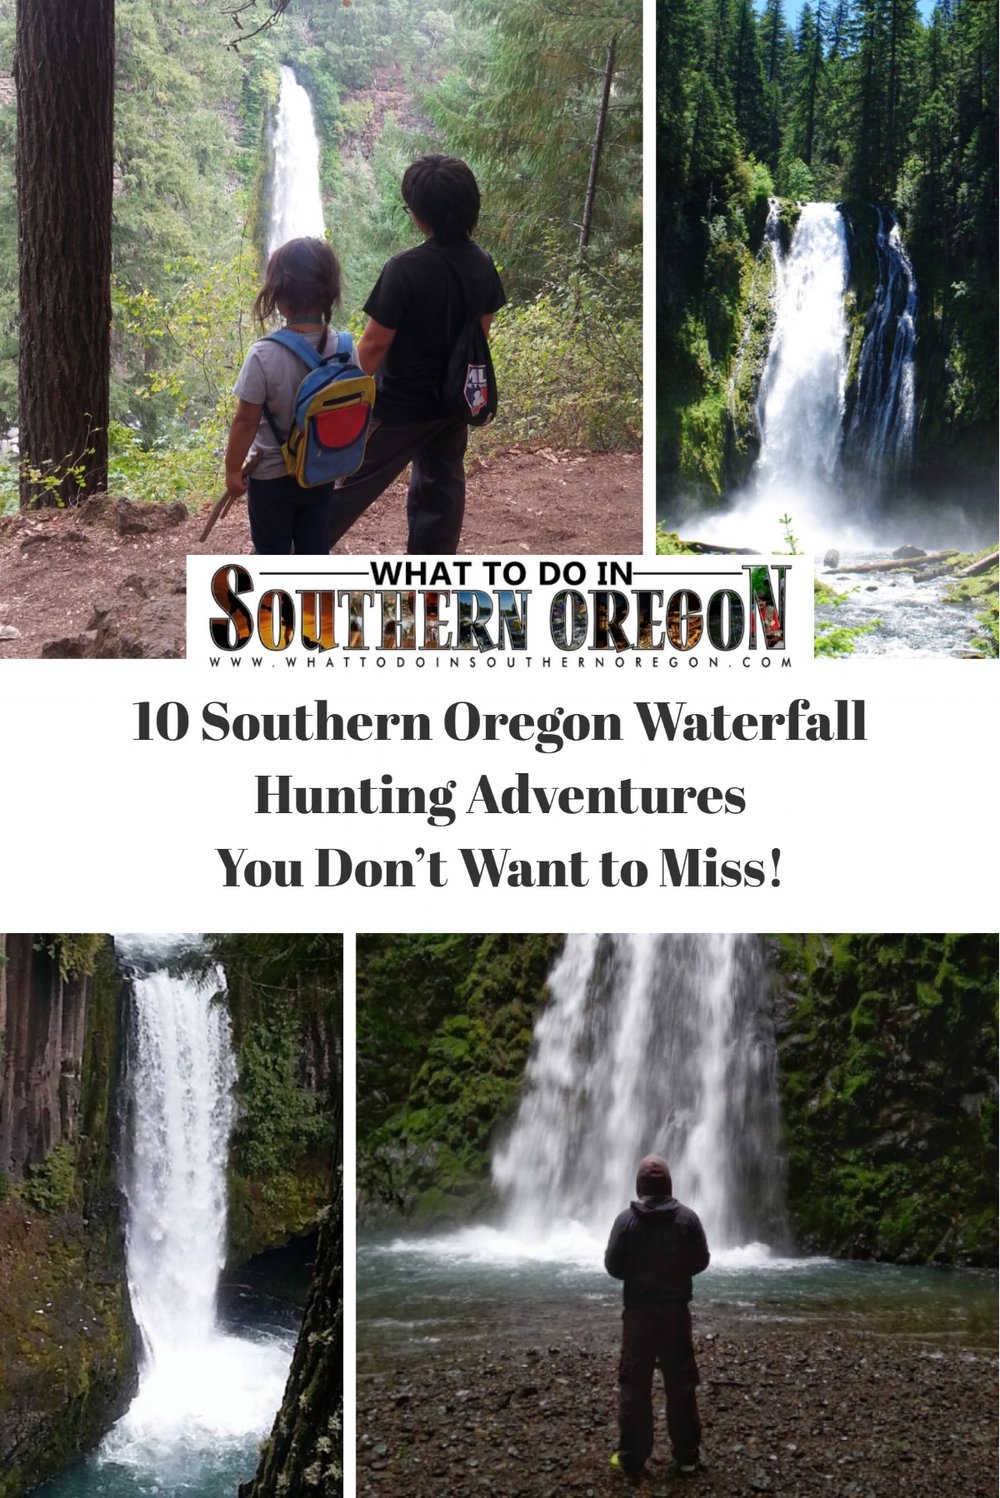 10 Southern Oregon Waterfall Adventures - What to do in Southern Oregon